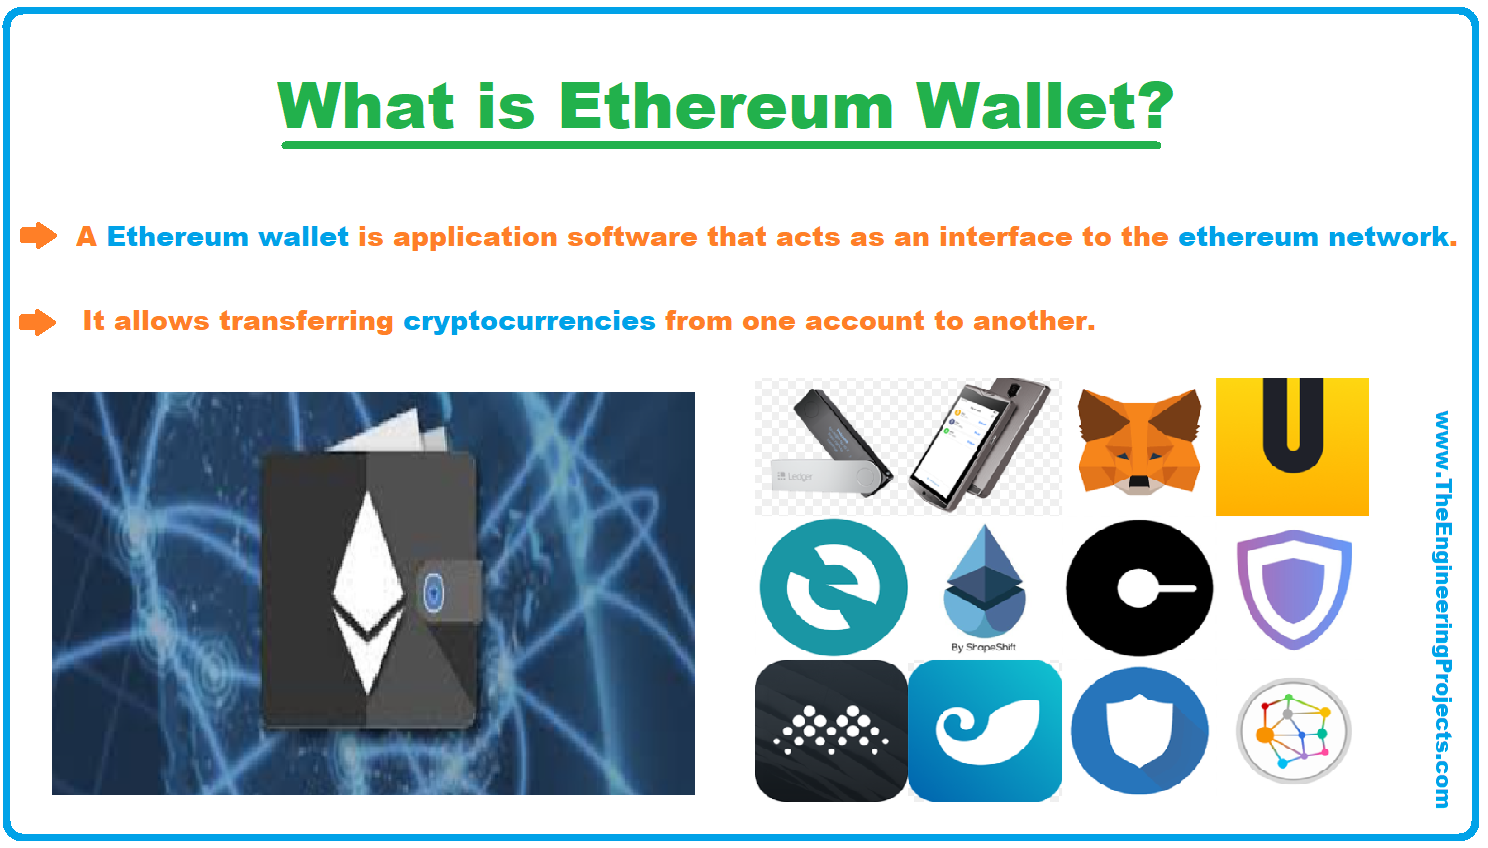 Ethereum Wallet, blockchain wallet, feature of wallets, Key Management in Wallet, Wallet Design, Types of Wallet, Finding a Wallet